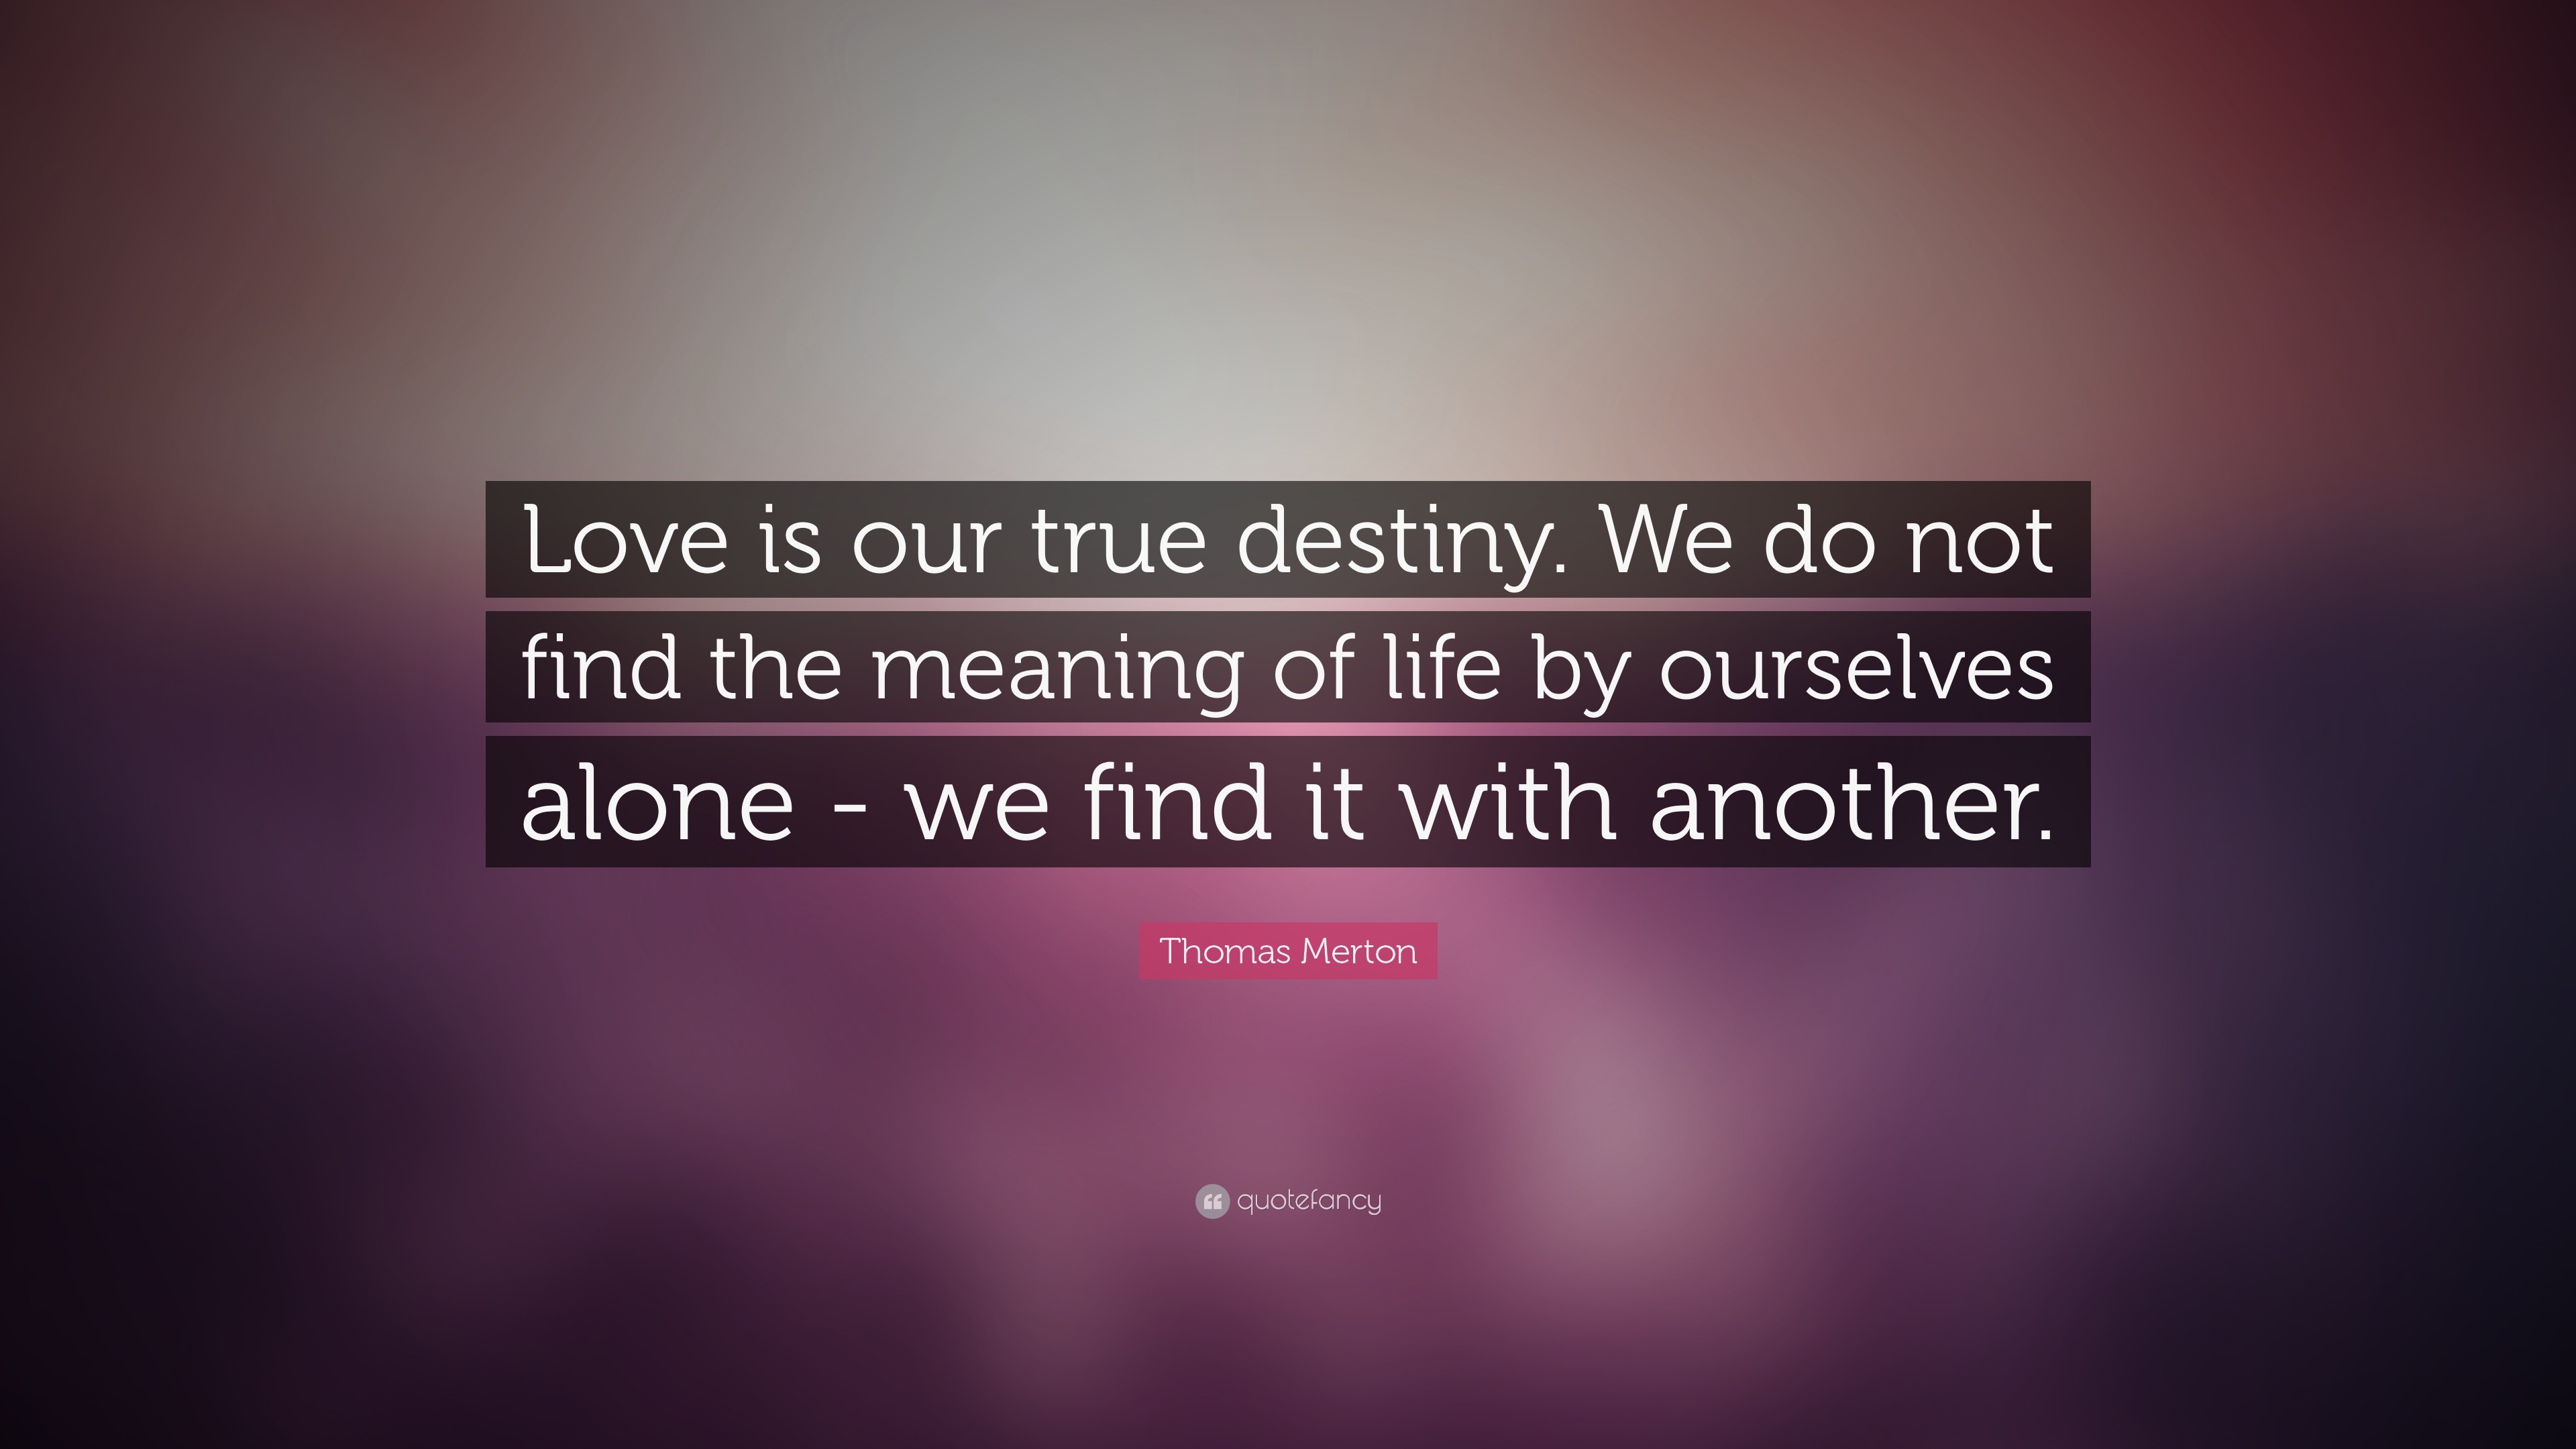 Thomas Merton Quote: “Love is our true destiny. We do not find the